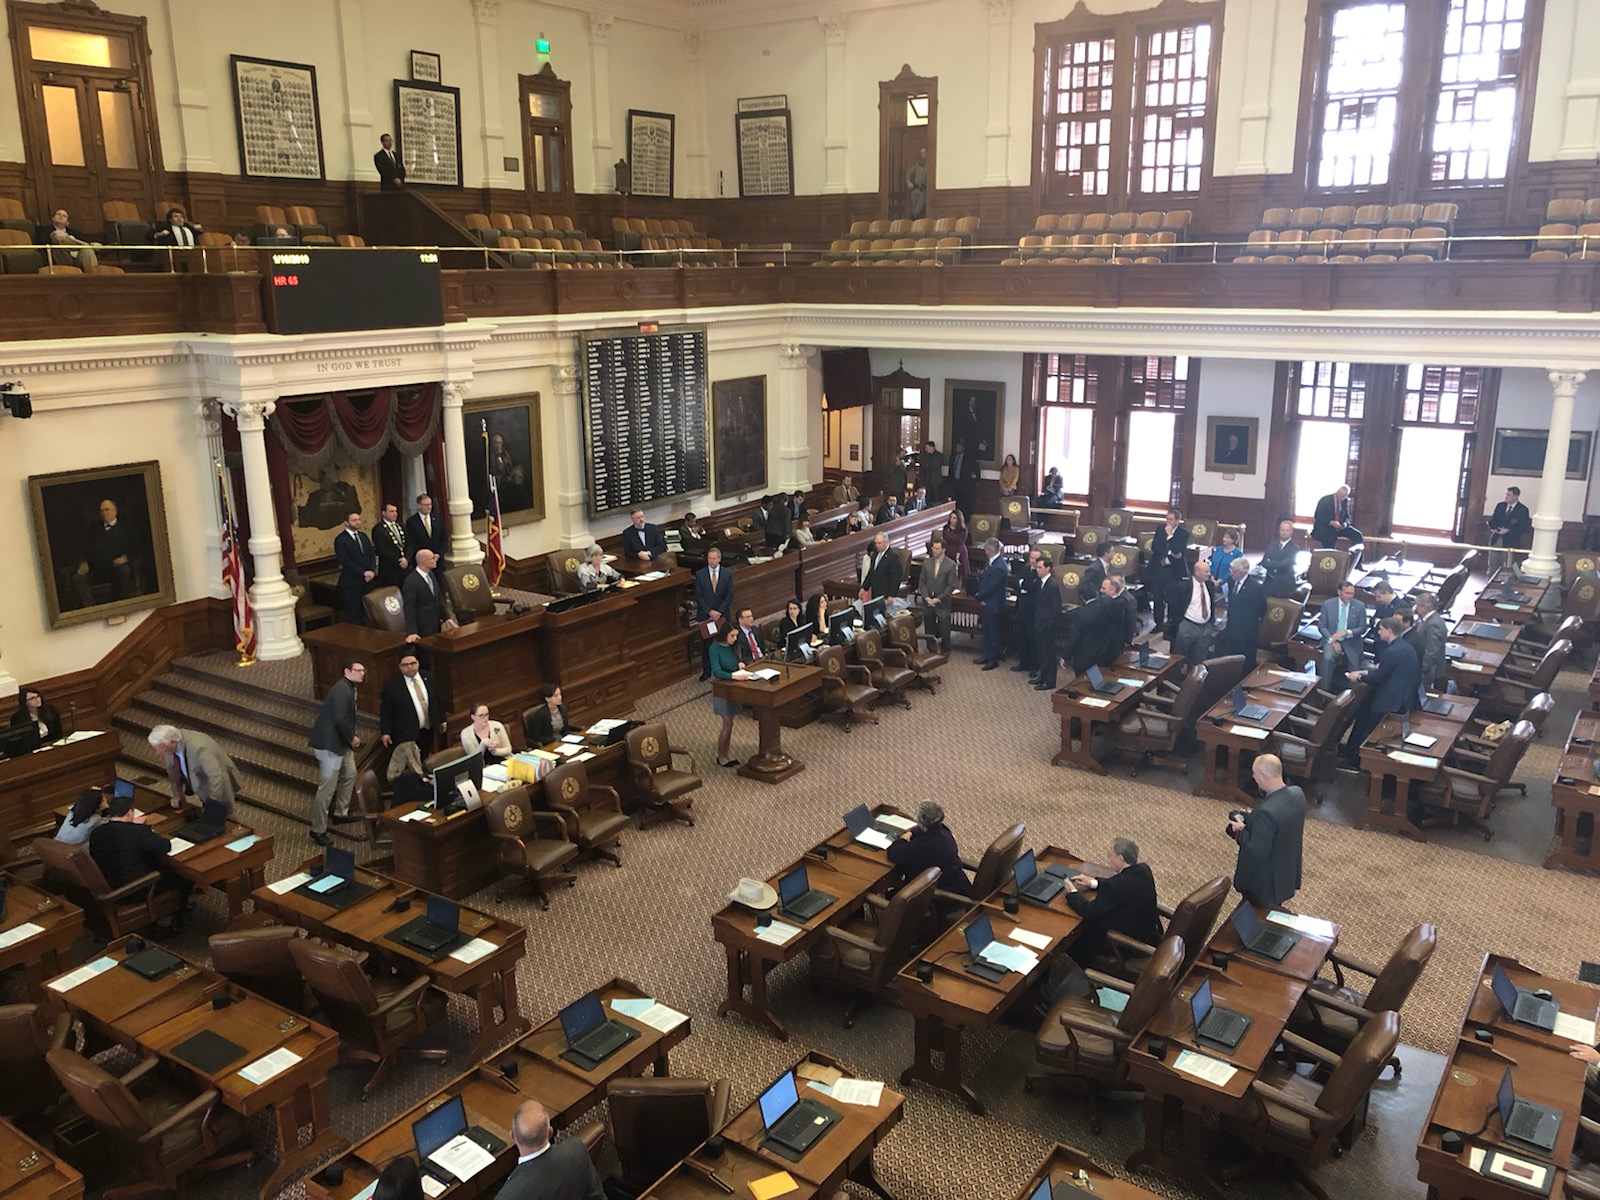 Texas House Representative Jim Murphy proposes a resolution to acknowledge the historic and economic links between Ireland and Texas on 16 January, 2019.